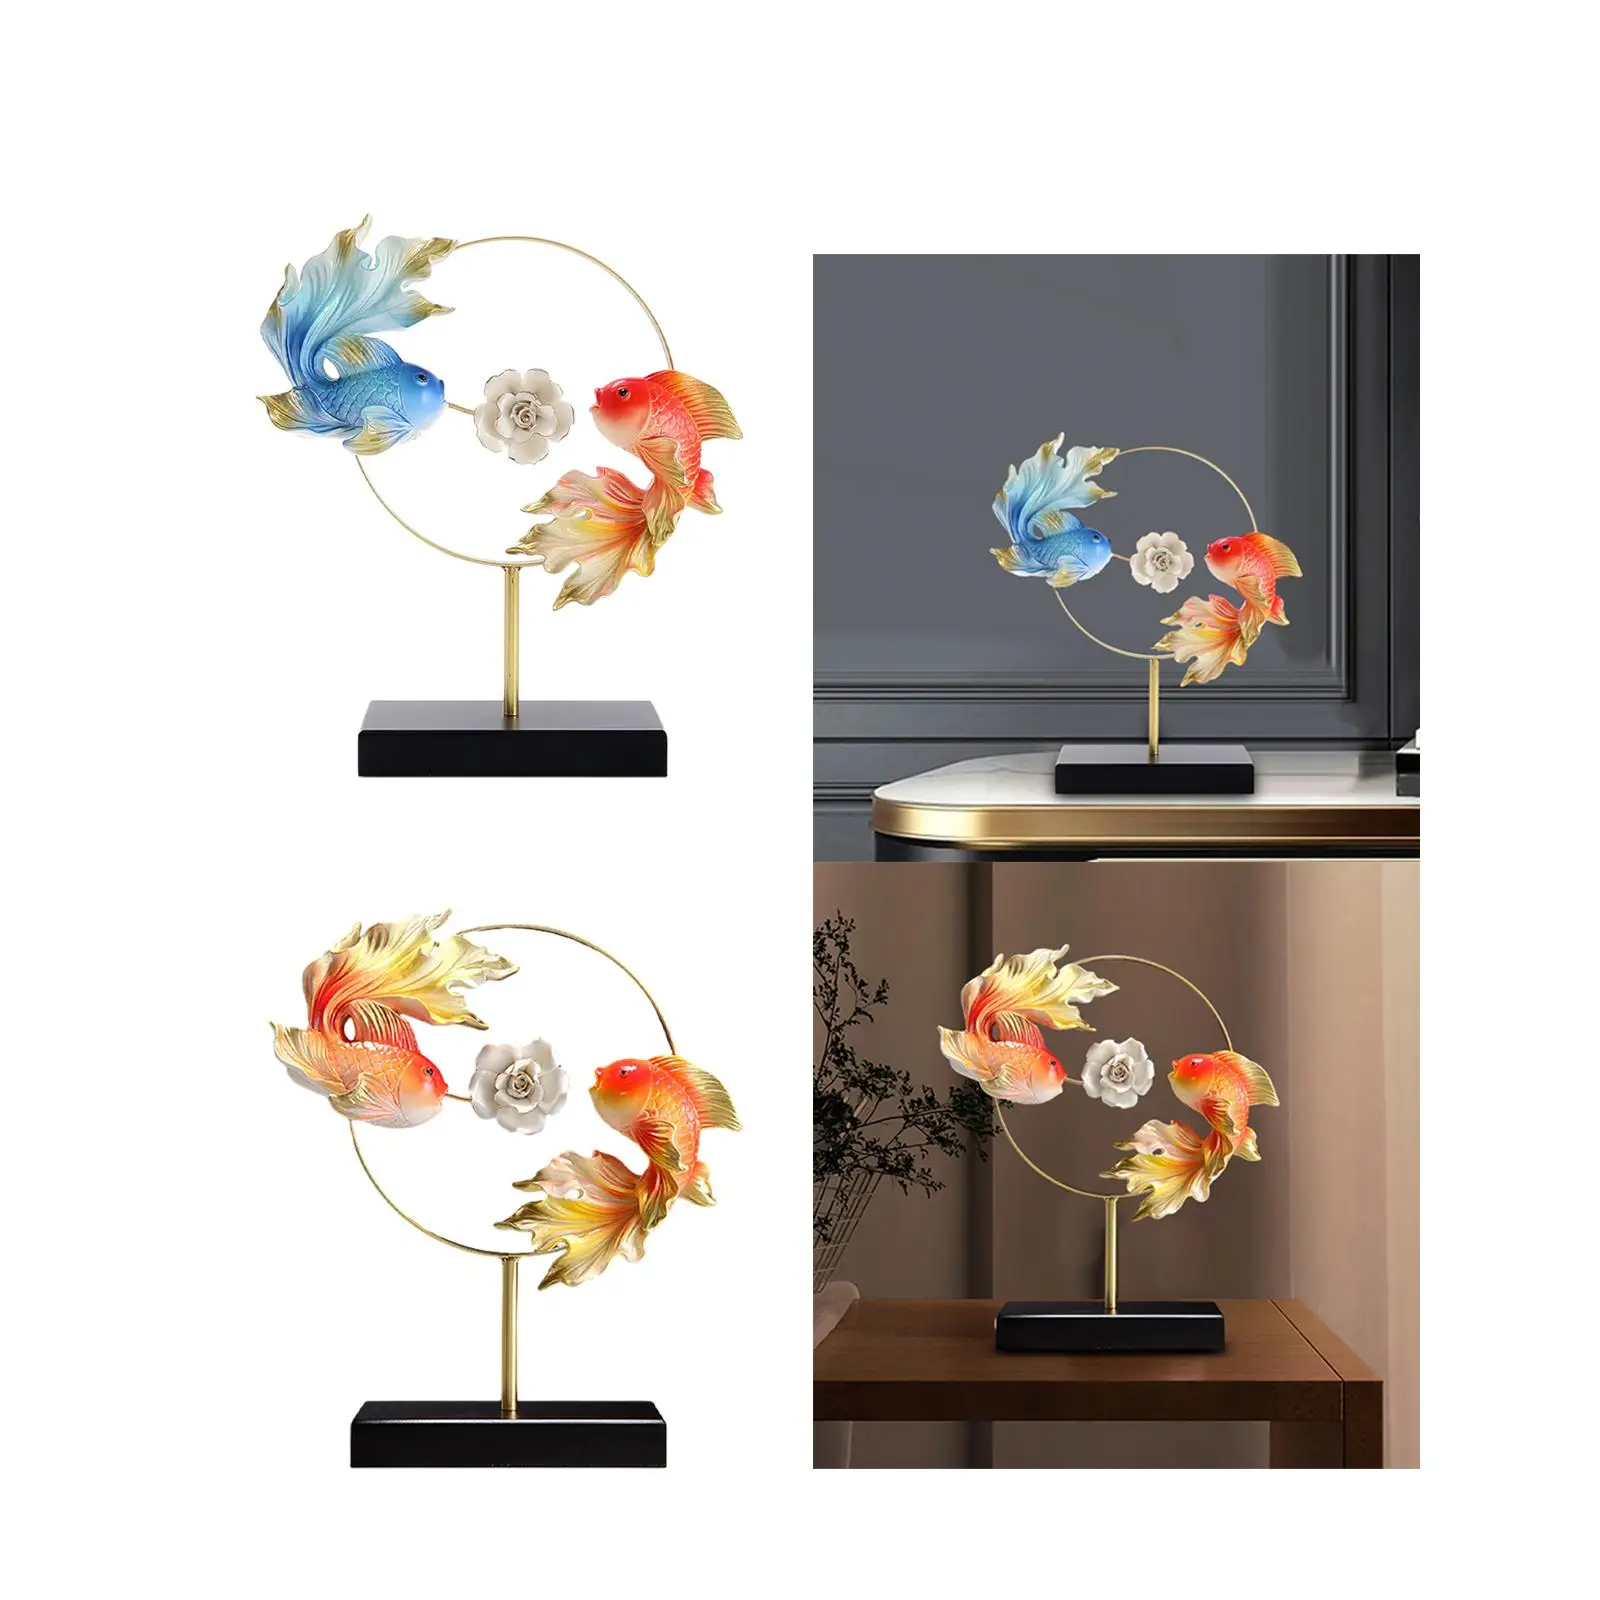 Fish Statue Resin Fish Figurine Gift Collection for Wedding Desktop Home